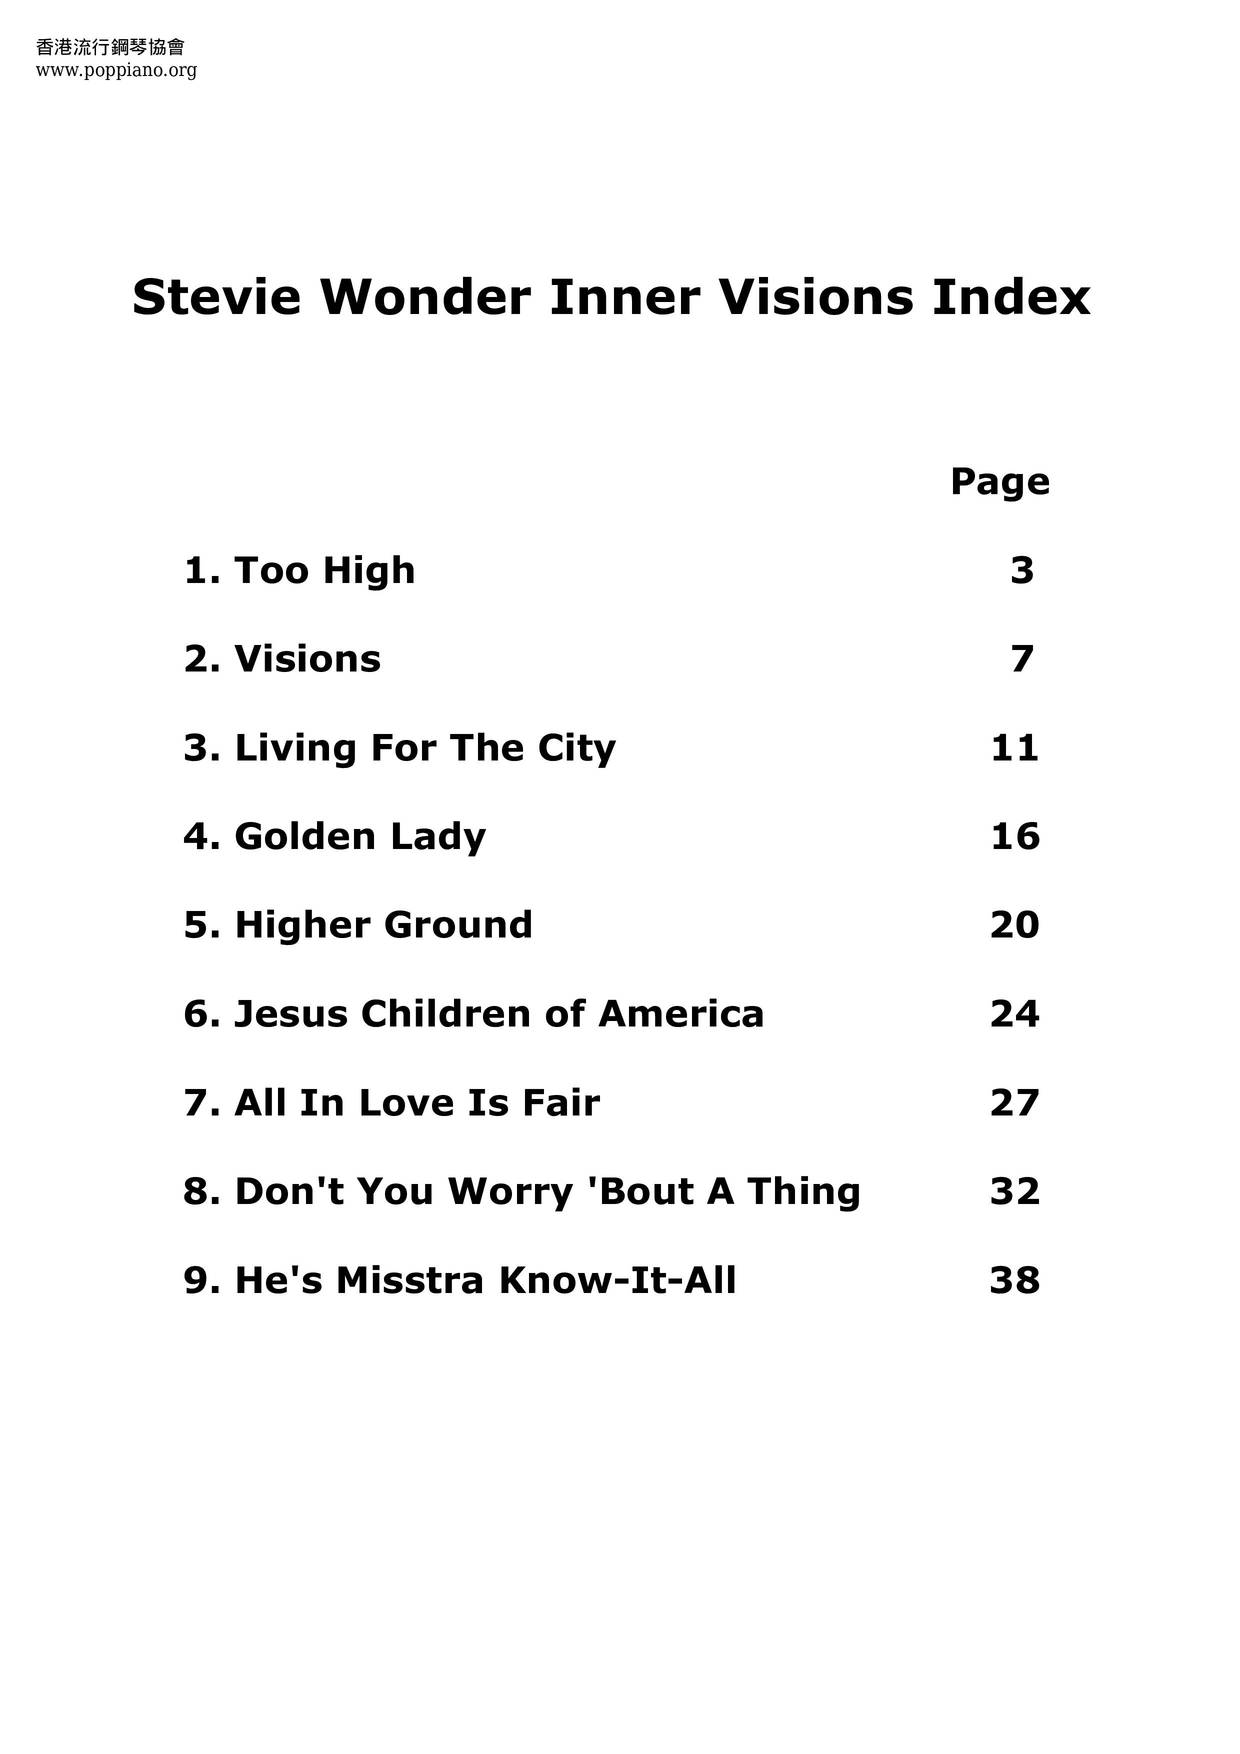 Stevie Wonder Song Book 41 Pagesピアノ譜